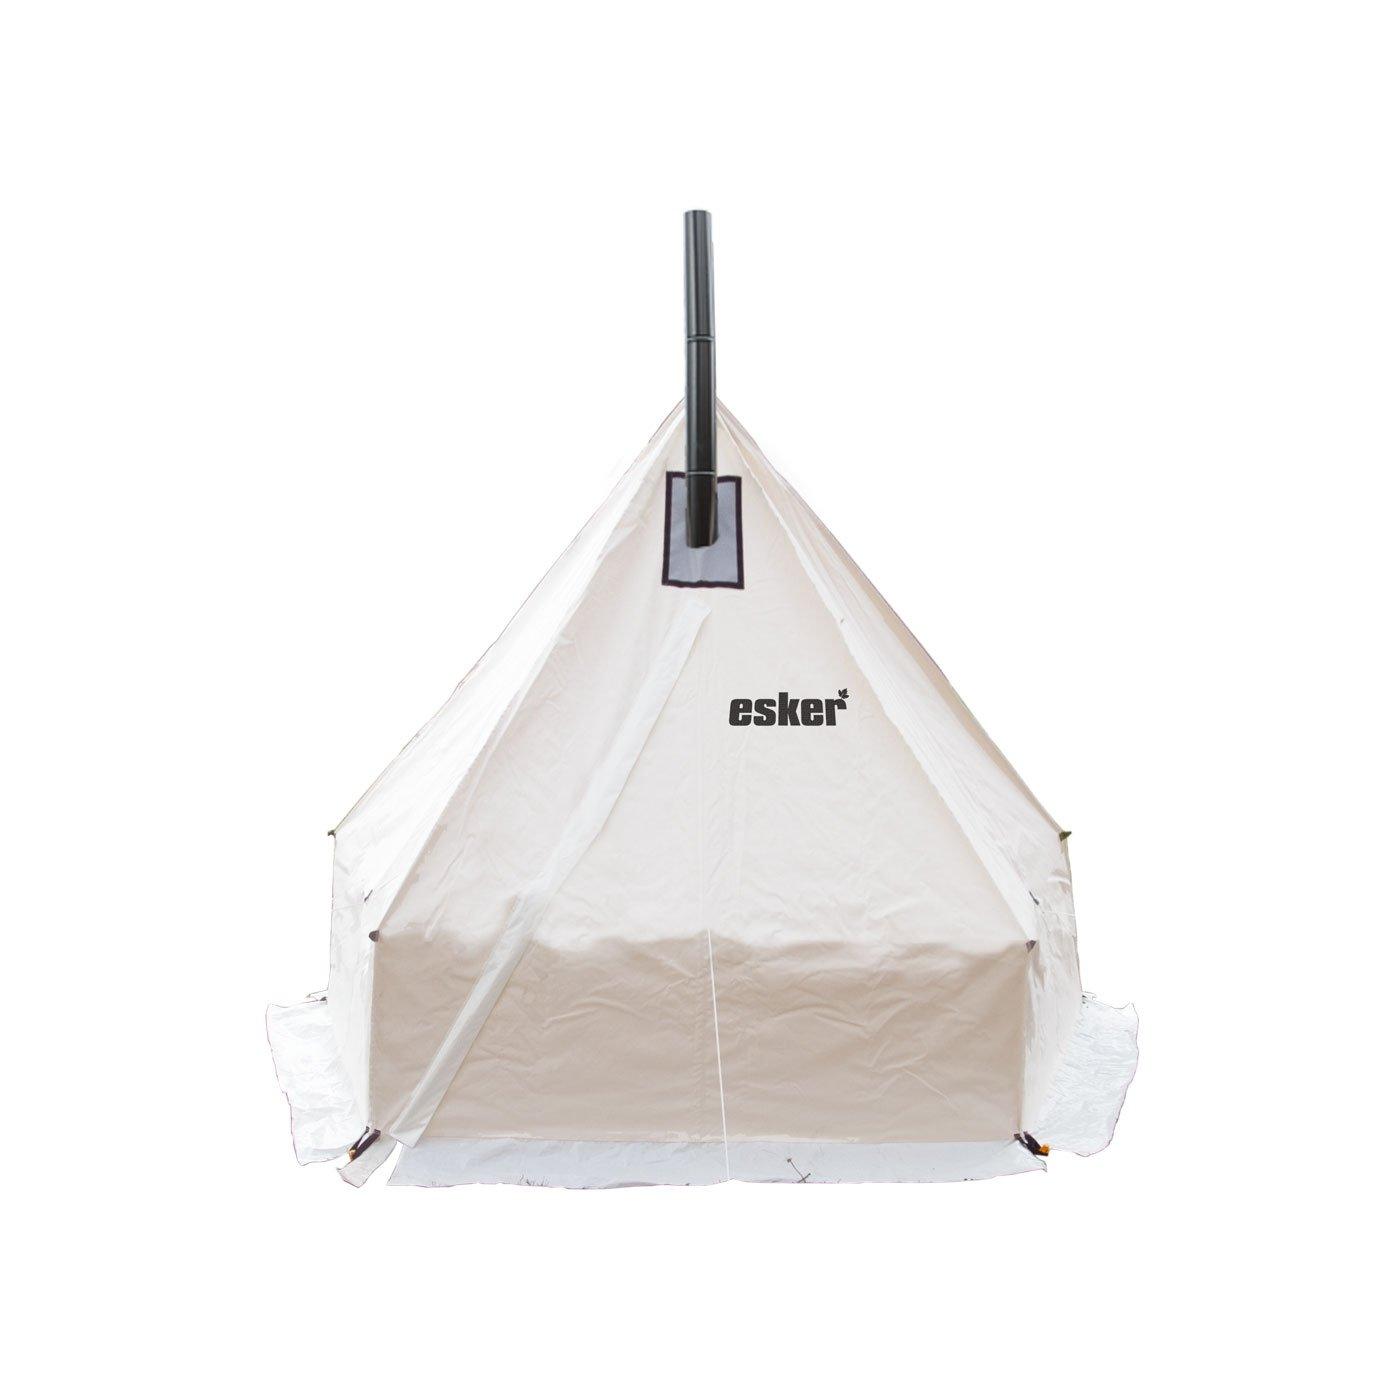 Winter Tents & Stoves